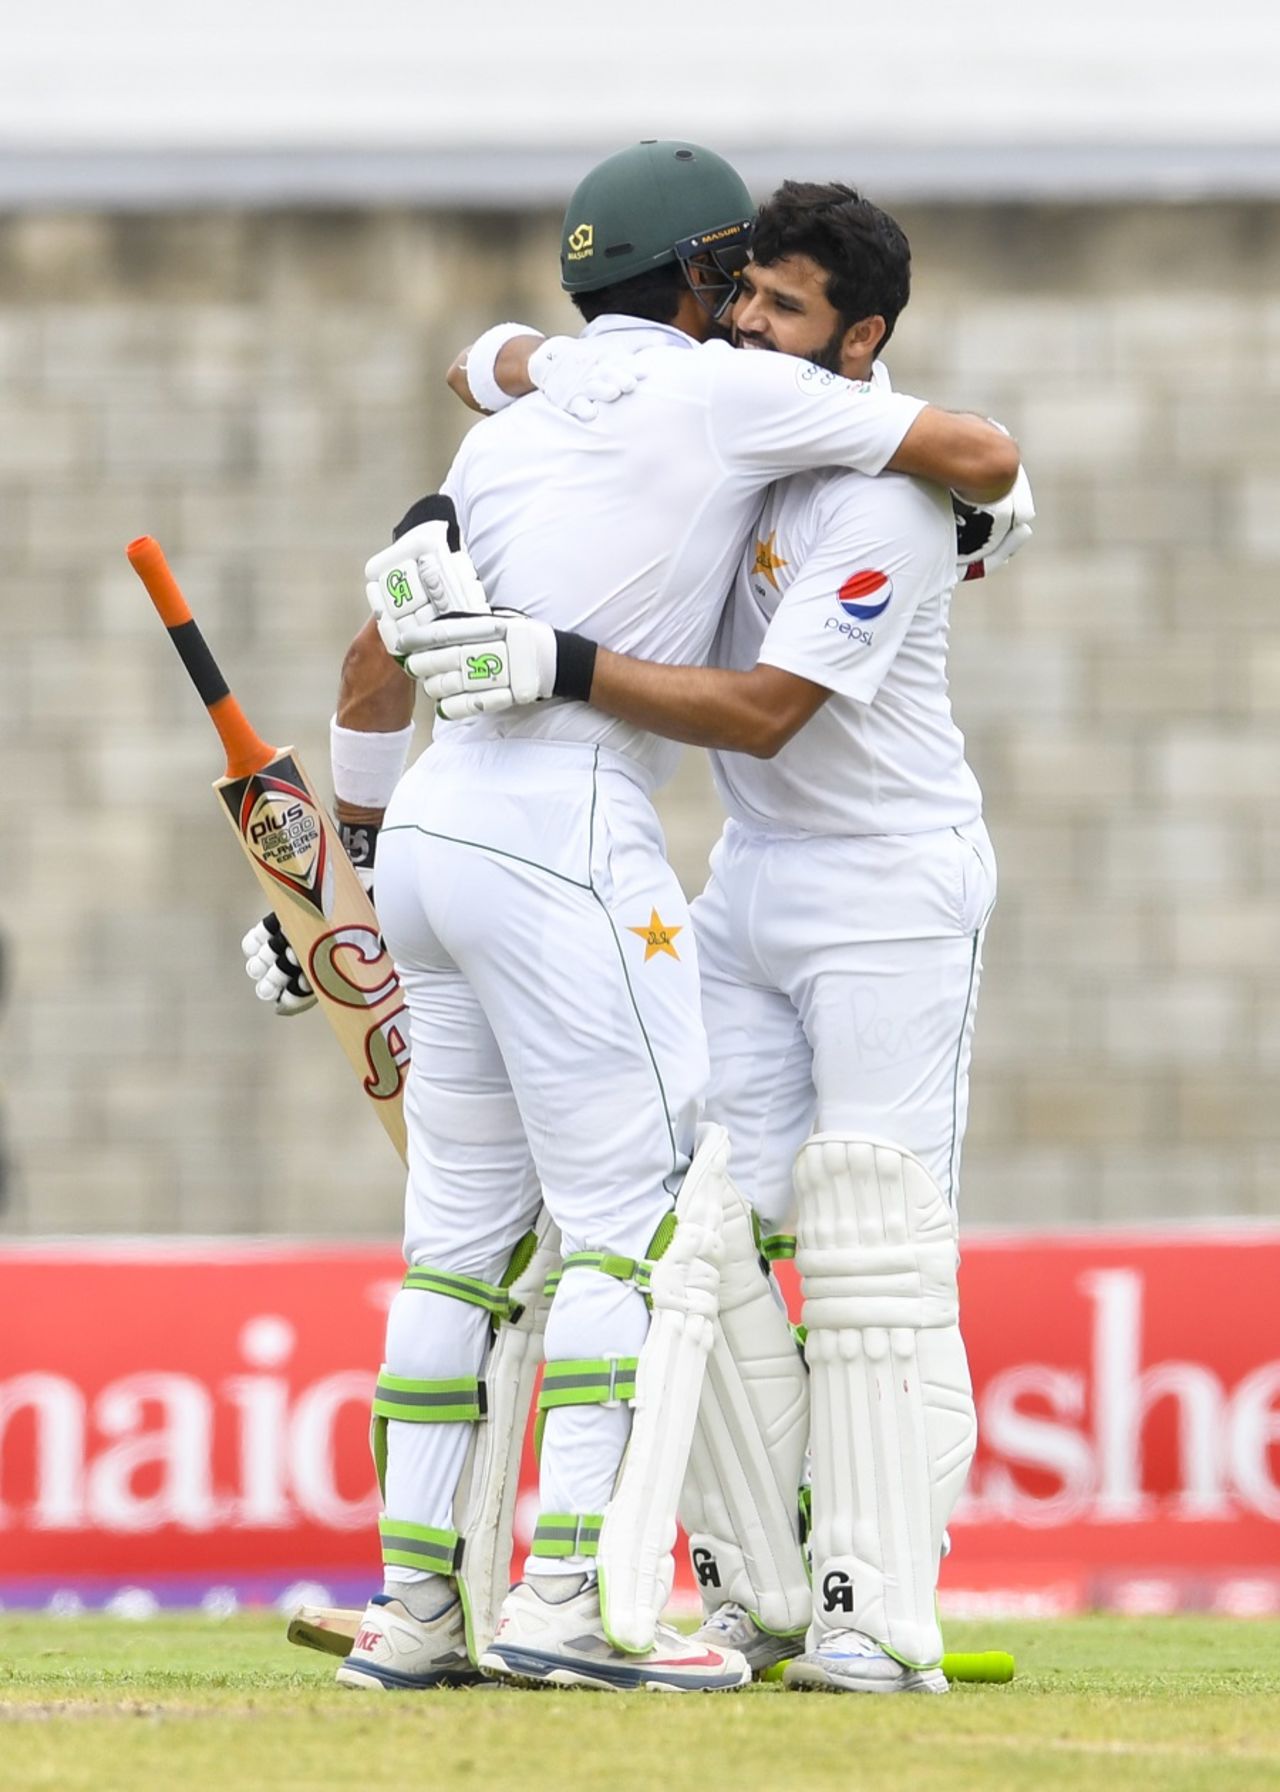 Azhar Ali celebrates his 13th Test century with his captain, West Indies v Pakistan, 2nd Test, Bridgetown, 3rd day, May 2, 2017